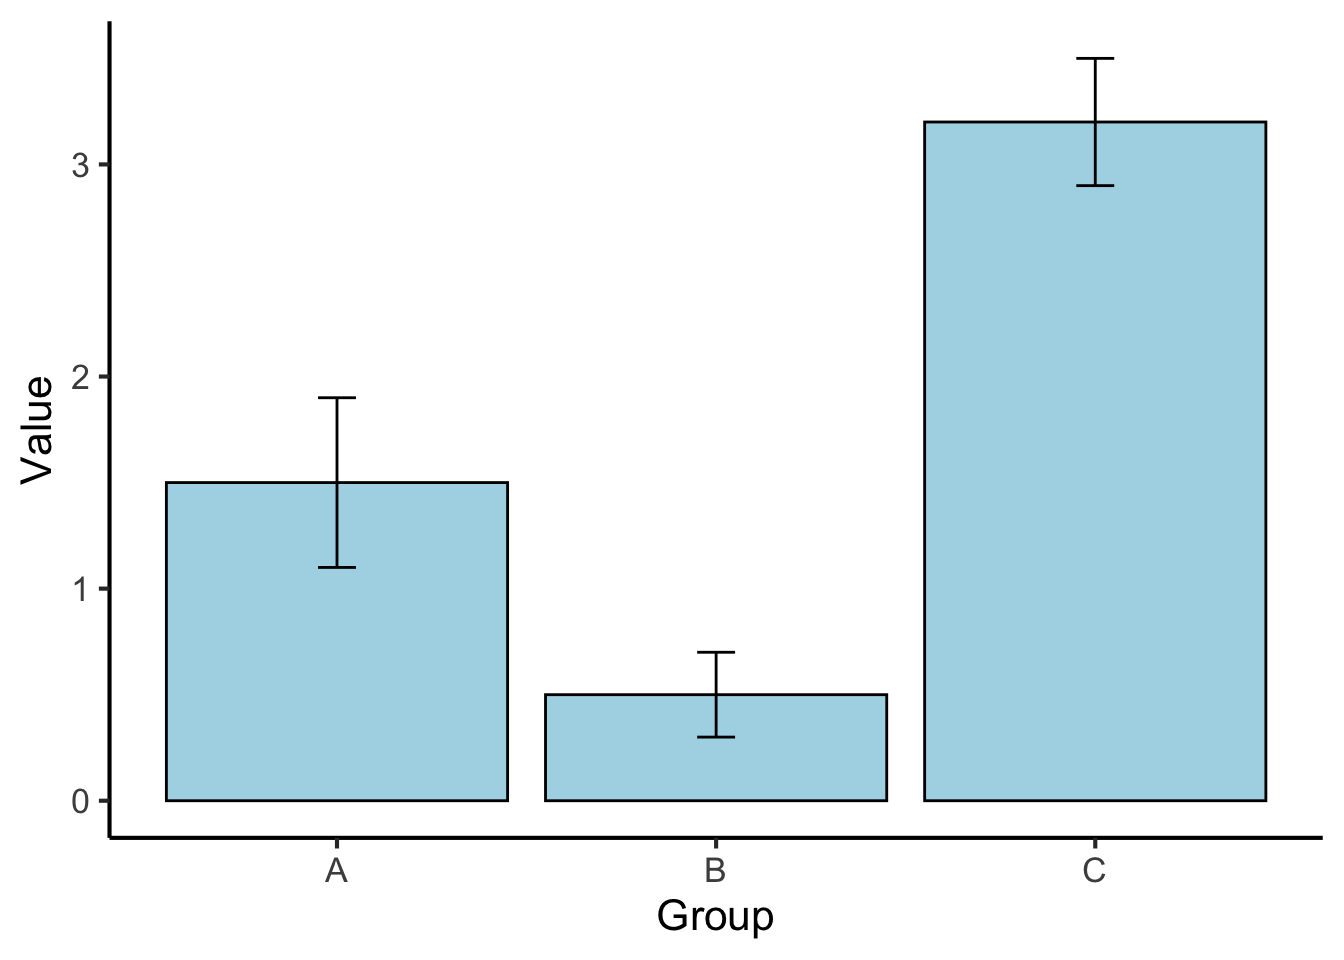 Means for three conditions in a fictional dataset. The error bars denote 95% confidence intervals.